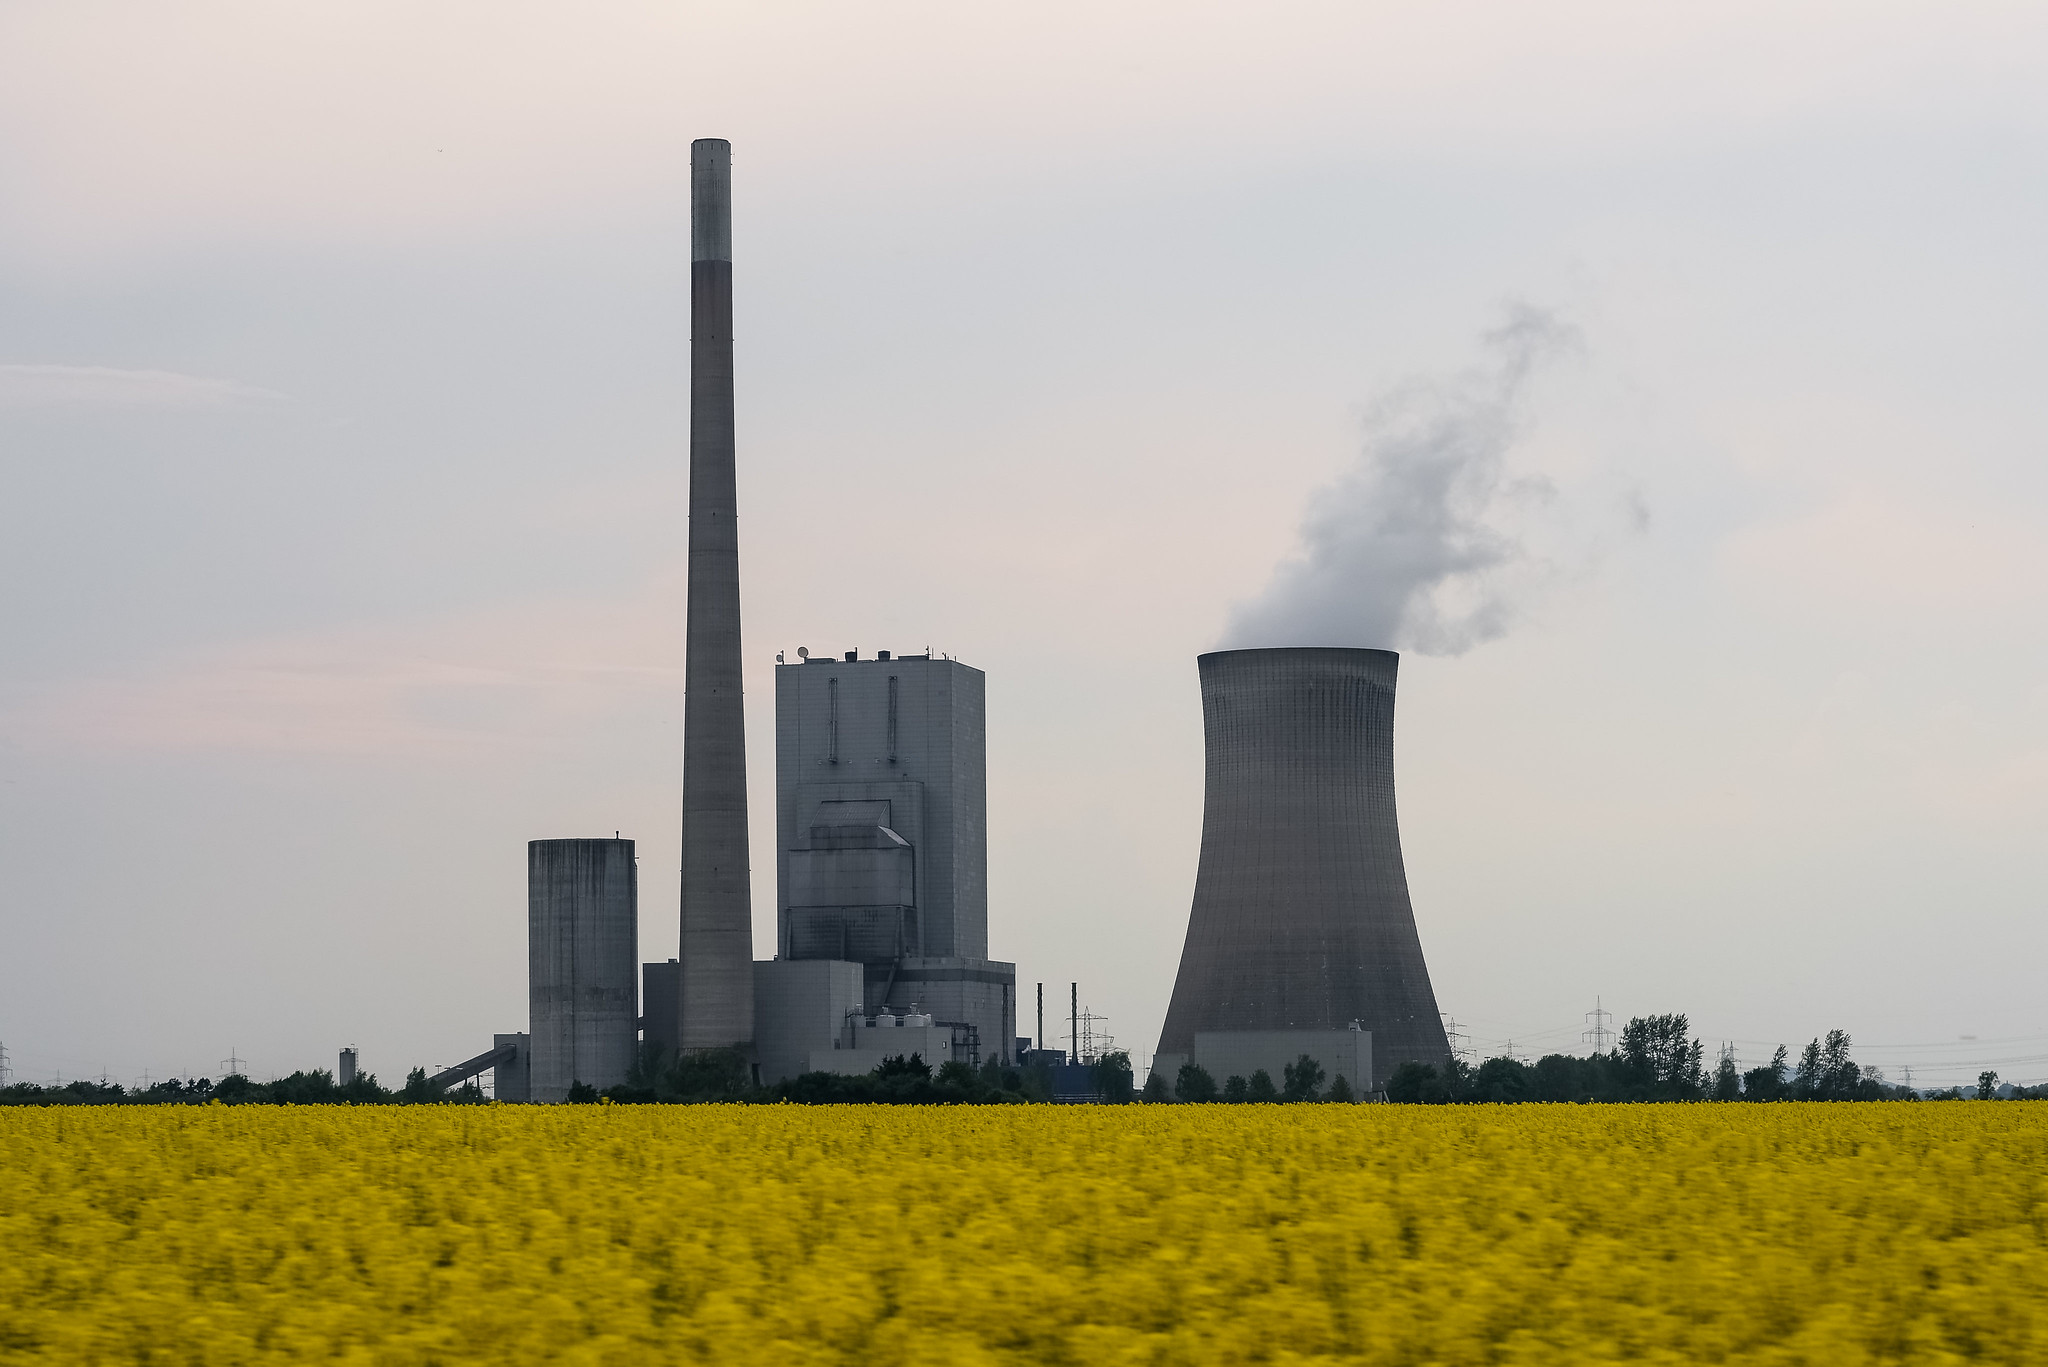 A coal fired power plant over seed oil plants.